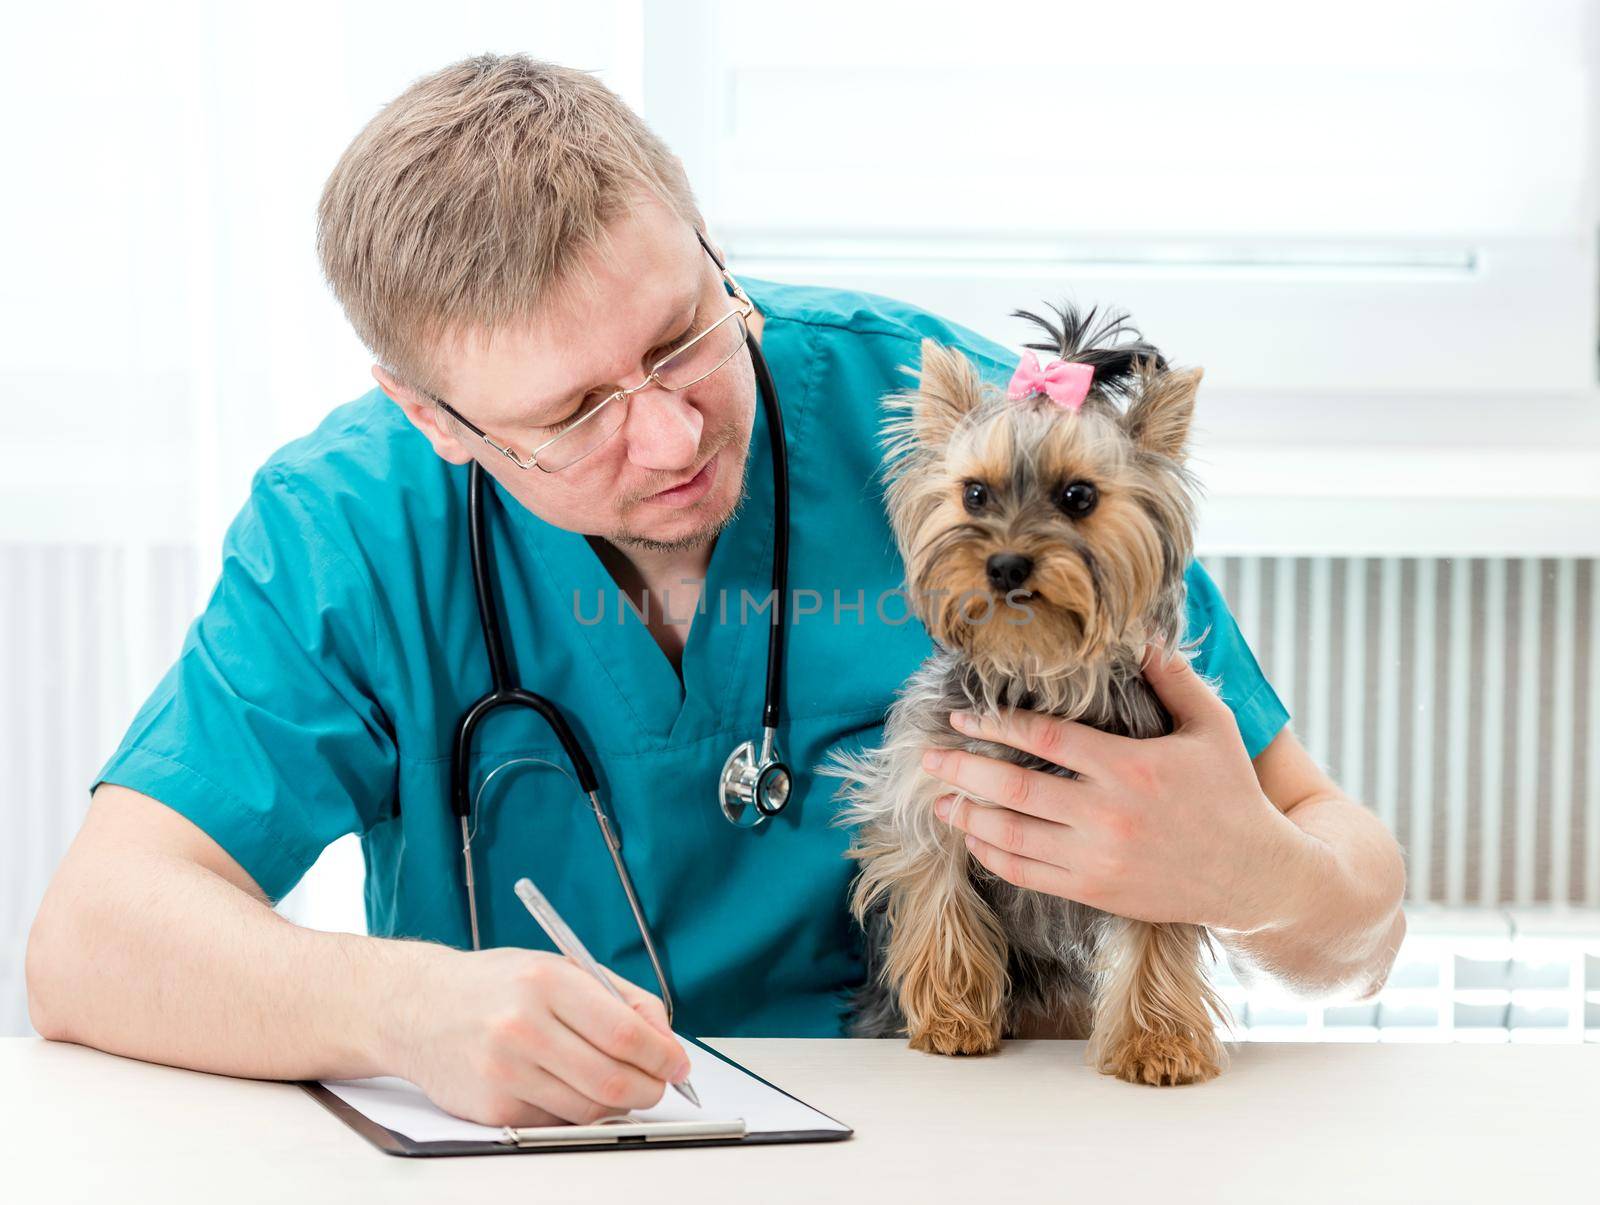 Veterinarian doctor holding Yorkshire Terrier dog on hands at vet clinic. Pet care concept